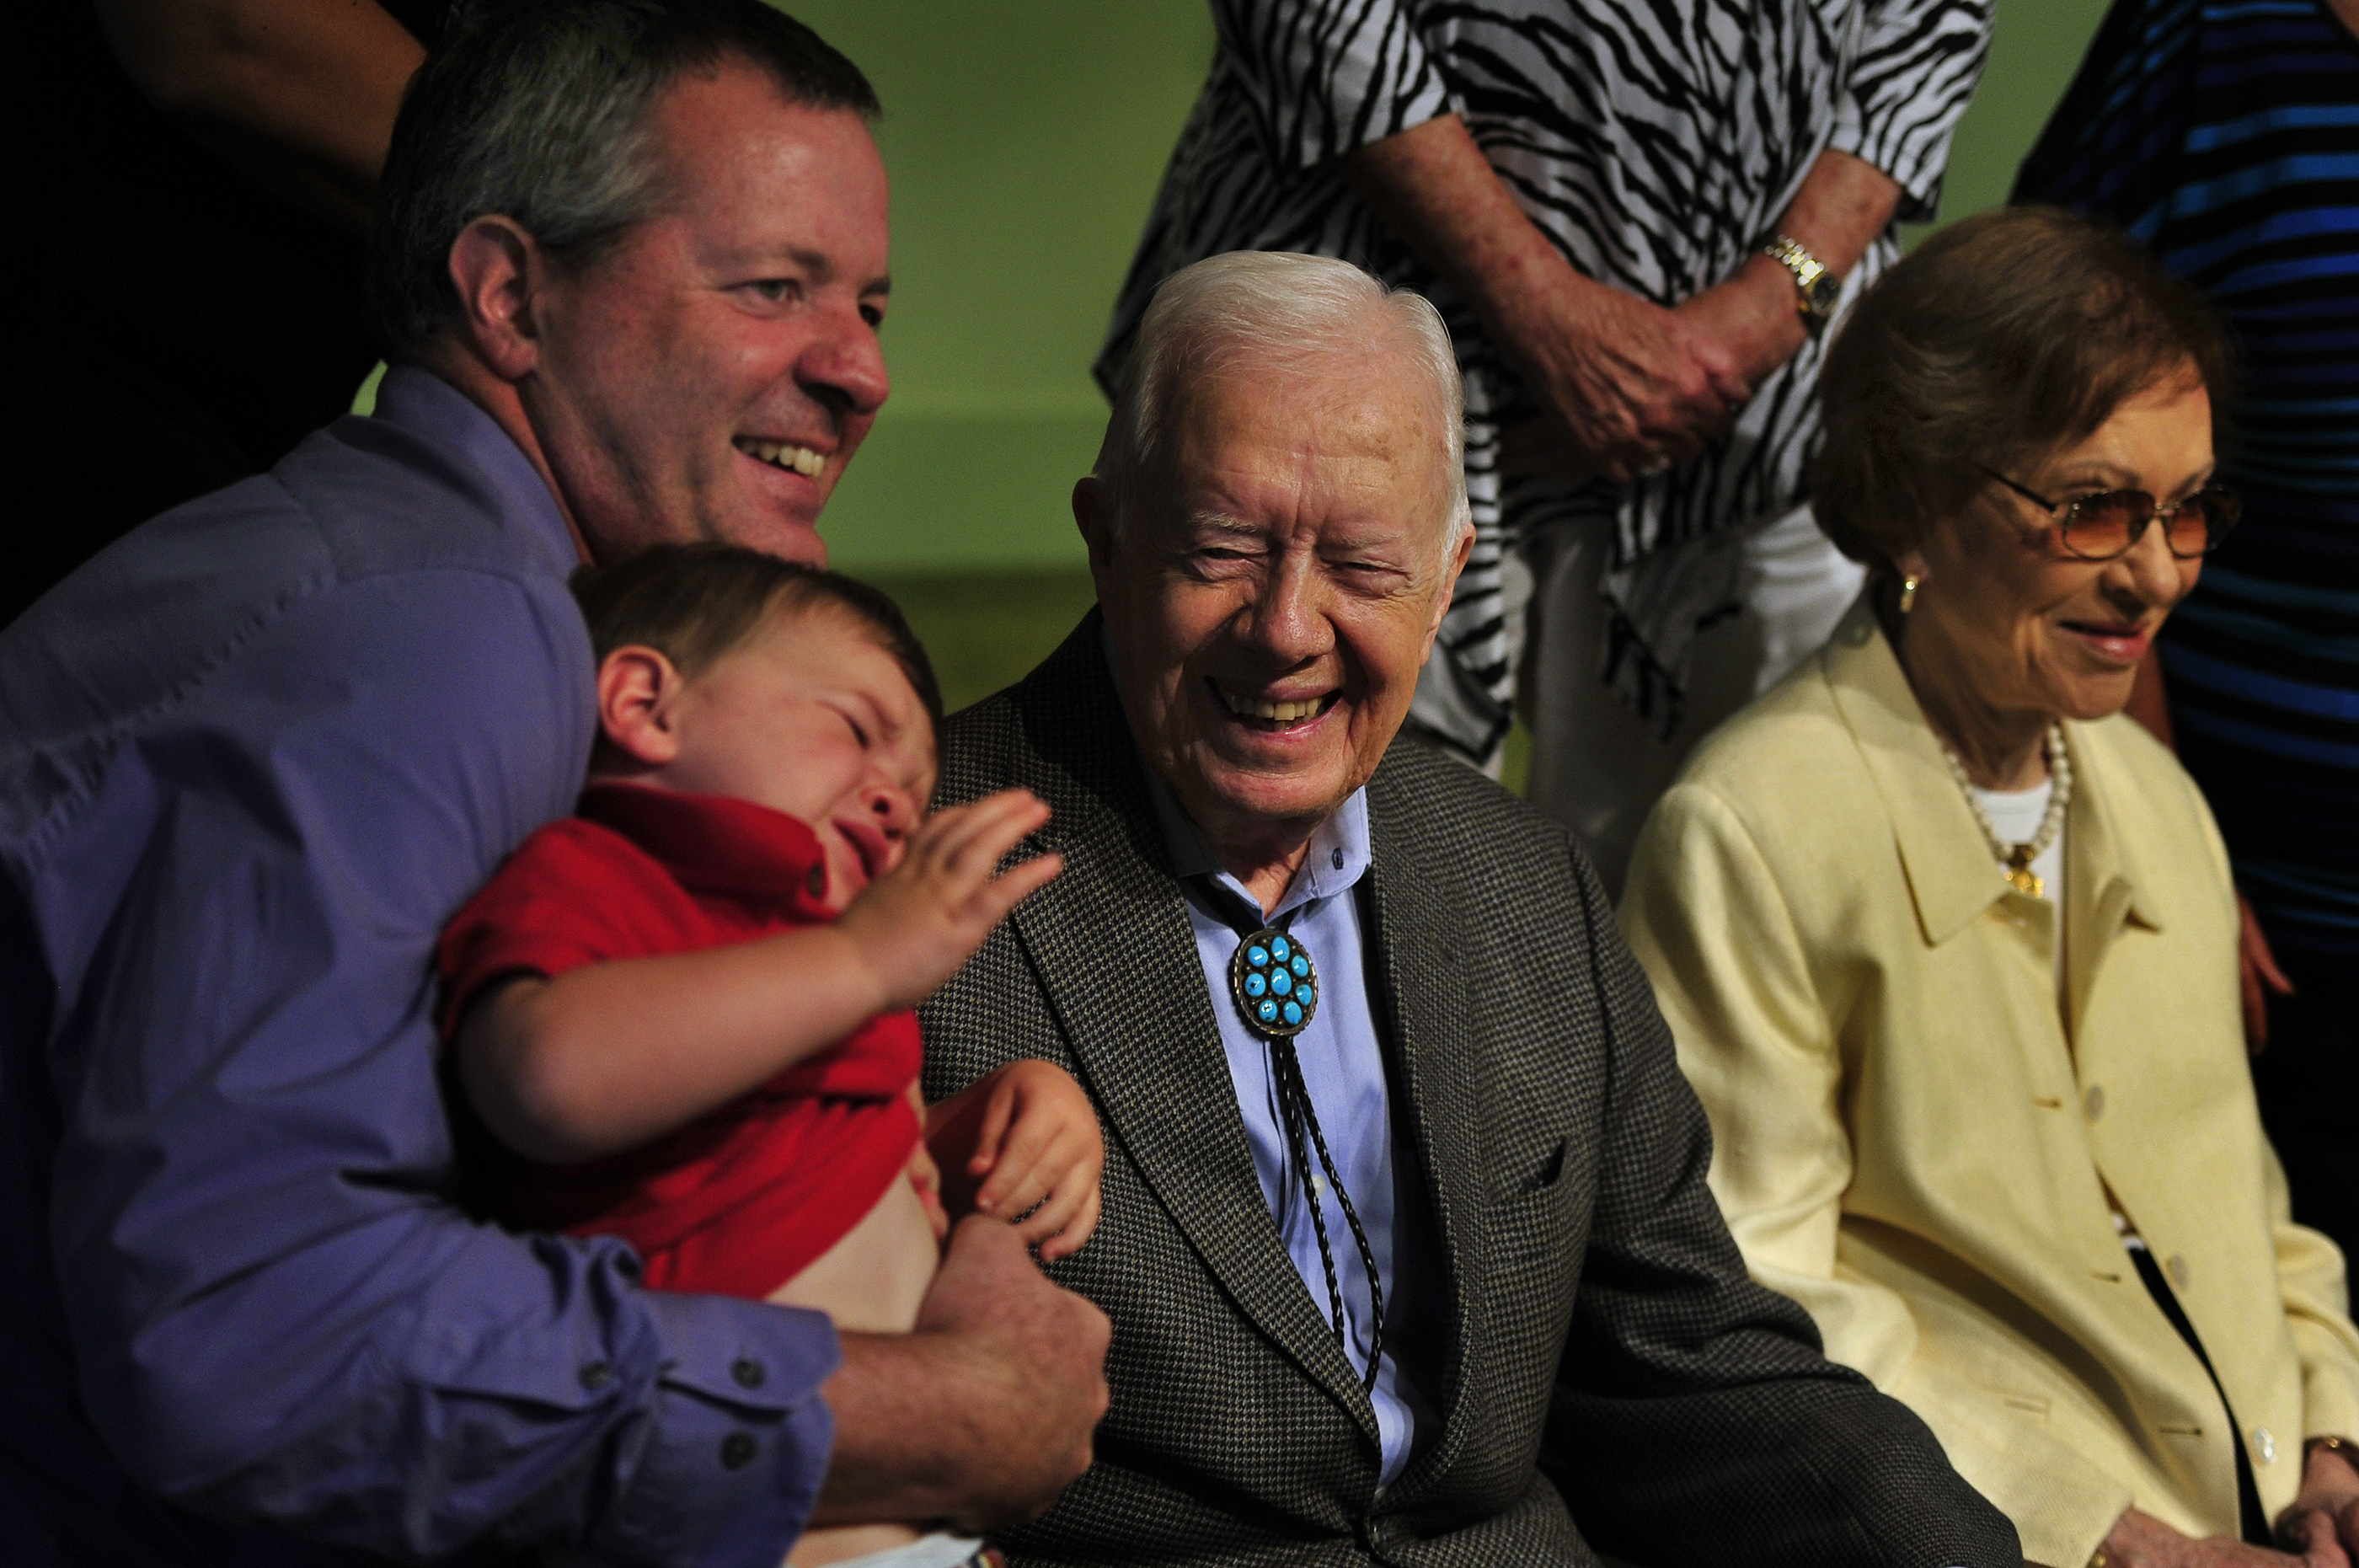 Andy Case-Simonson, Lennon Case-Simonson, and Jimmy and Rosalynn Carter in Plains, Georgia, on August 30, 2015. | Source: Getty Images